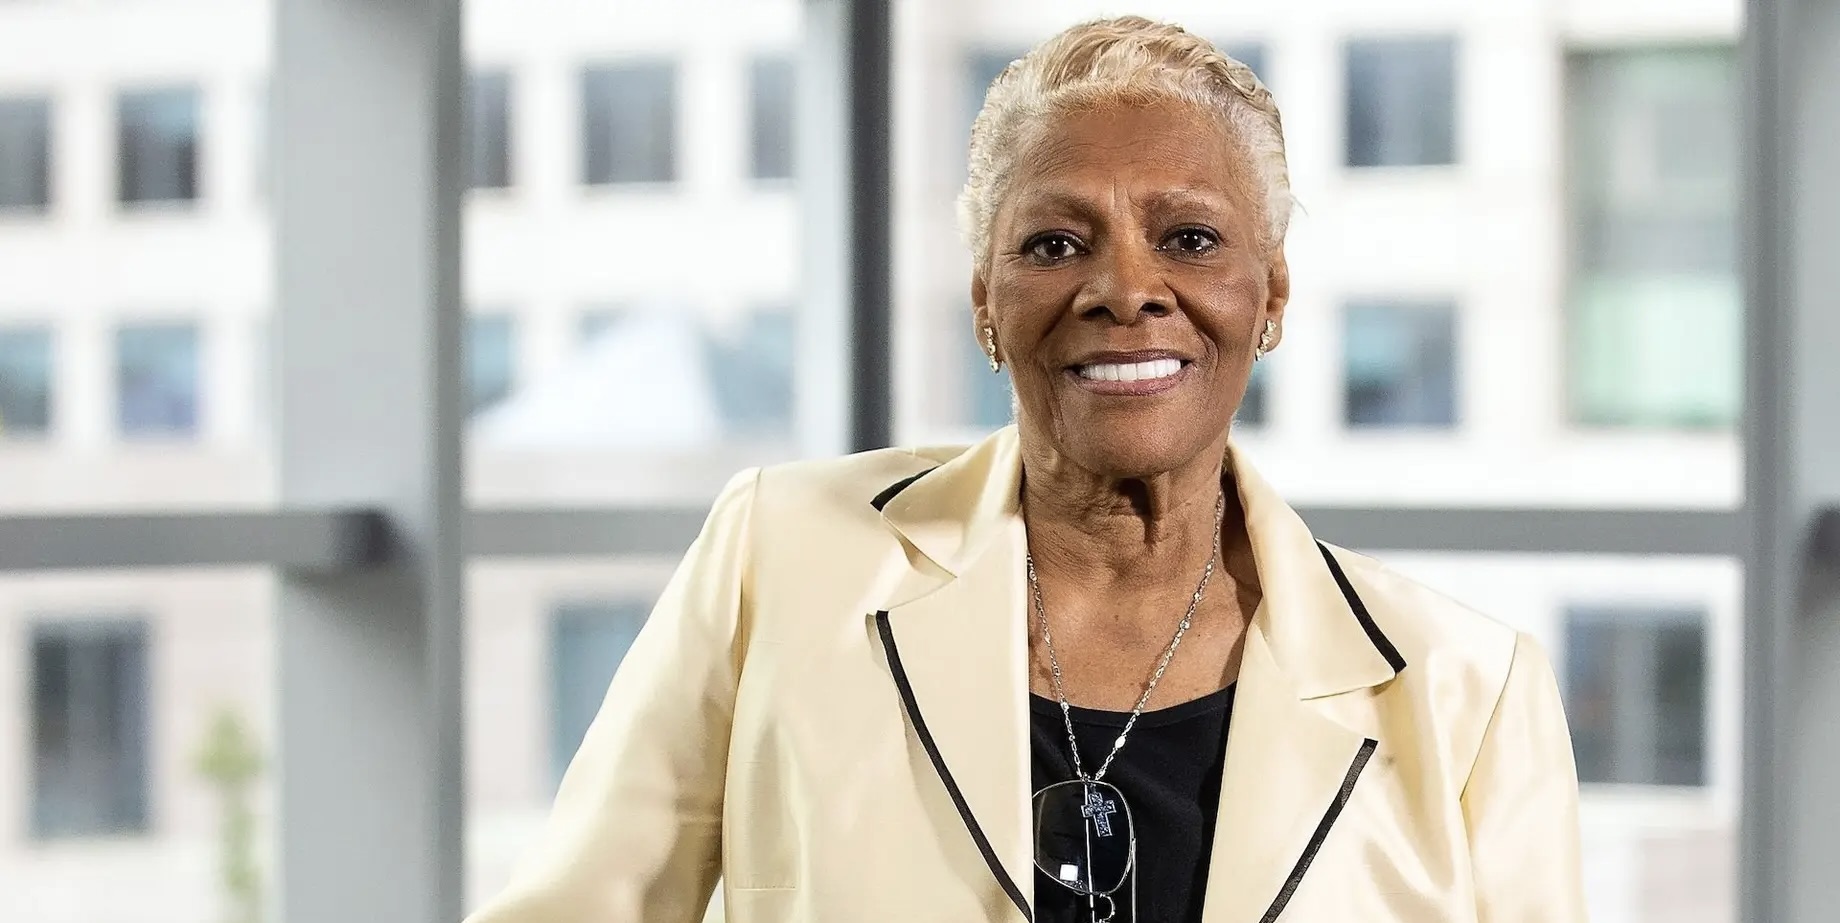 Dionne Warwick Jokingly Resigns From Twitter CEO Position: ‘They’ve Got Too Much Going On Here”